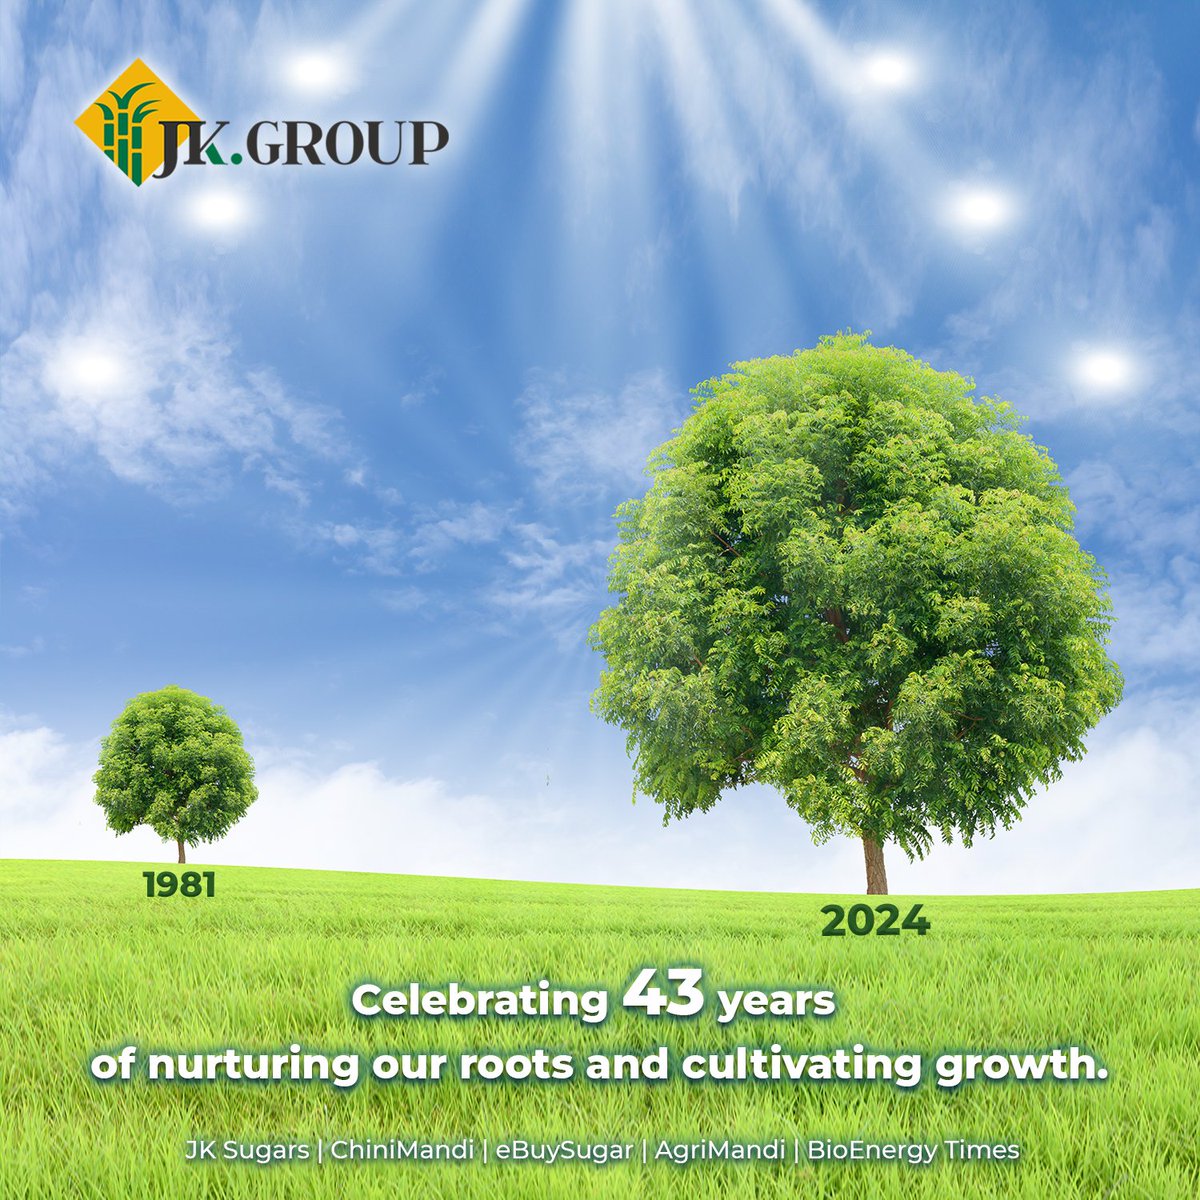 On JK Group's anniversary, we cherish our journey from humble beginnings to industry leadership.Grateful for our team, clients, and supporters. Here's to celebrating success and embracing the future with optimism. Best wishes to all involved!@ChiniMandi @eBuySugar @AgriMandiLive